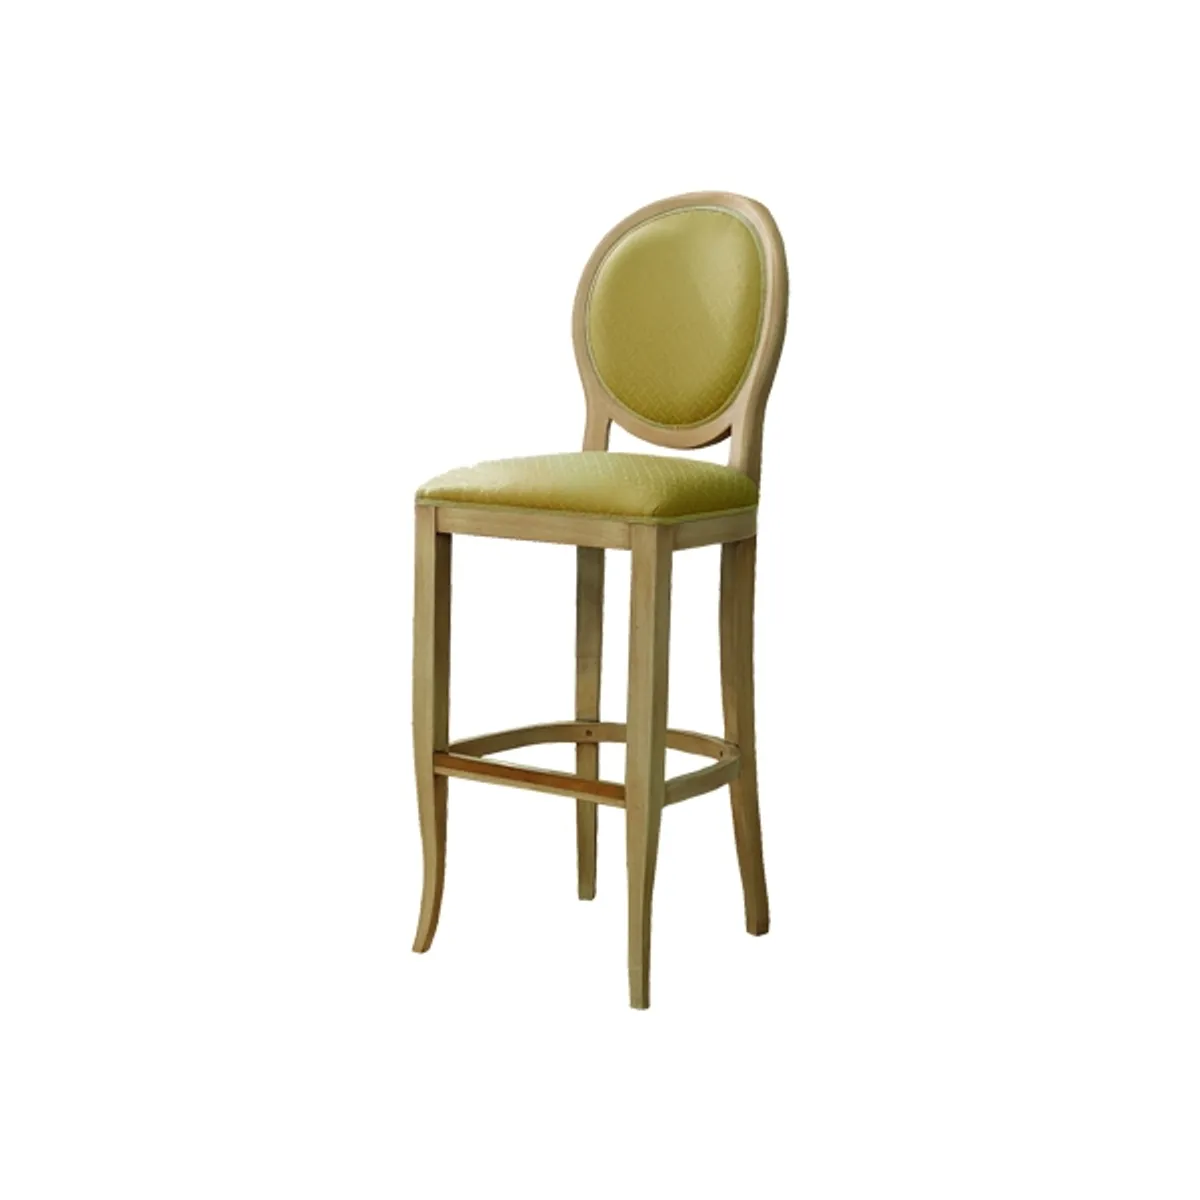 Dauphine bar stool Inside Out Contracts